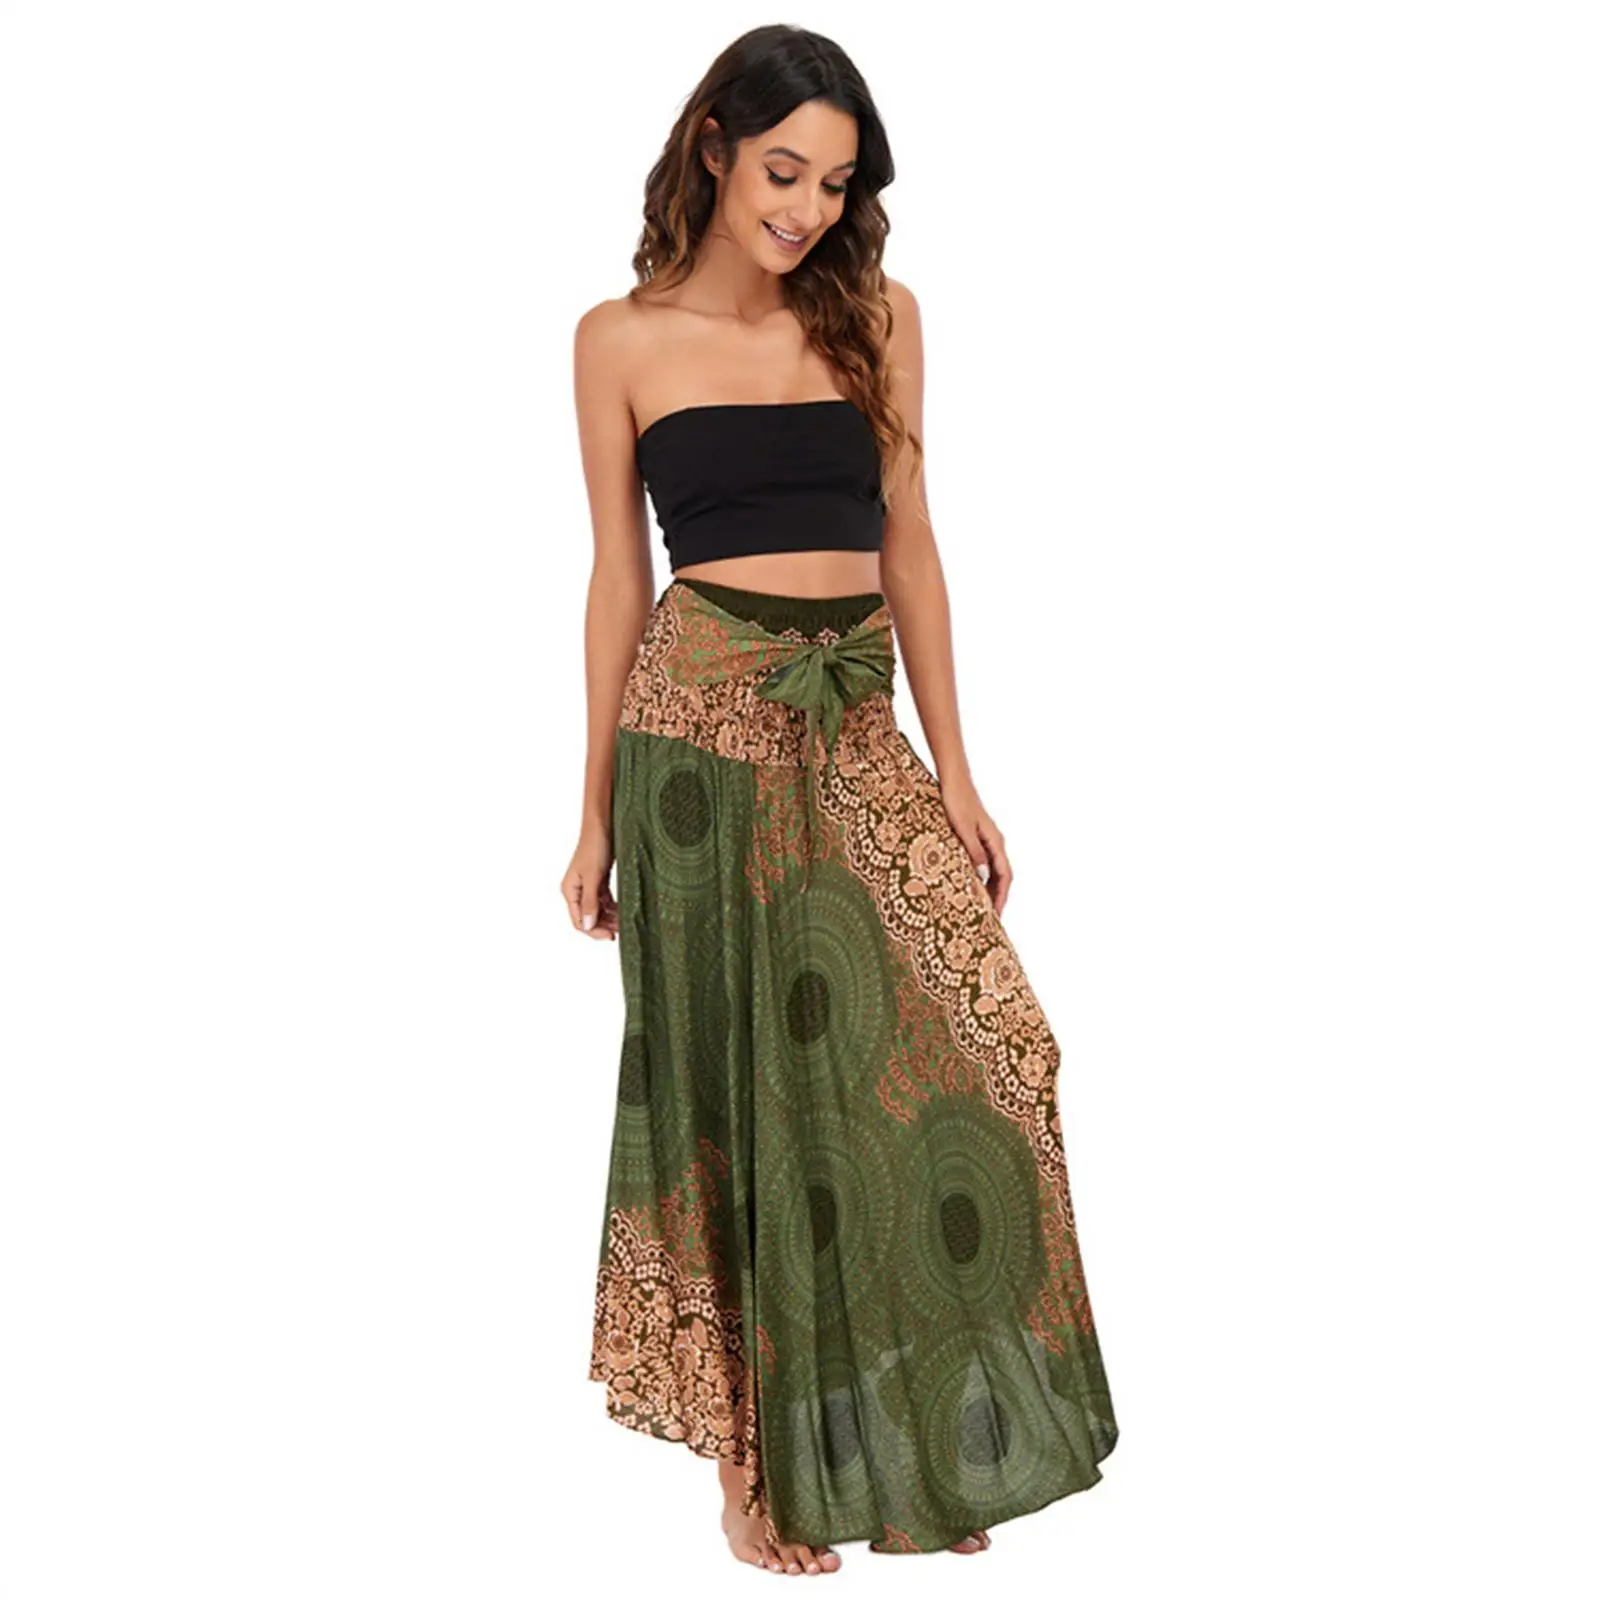 Fashion  Maxi Skirt  Hippie Style Wrap Dancing Costume Clothing